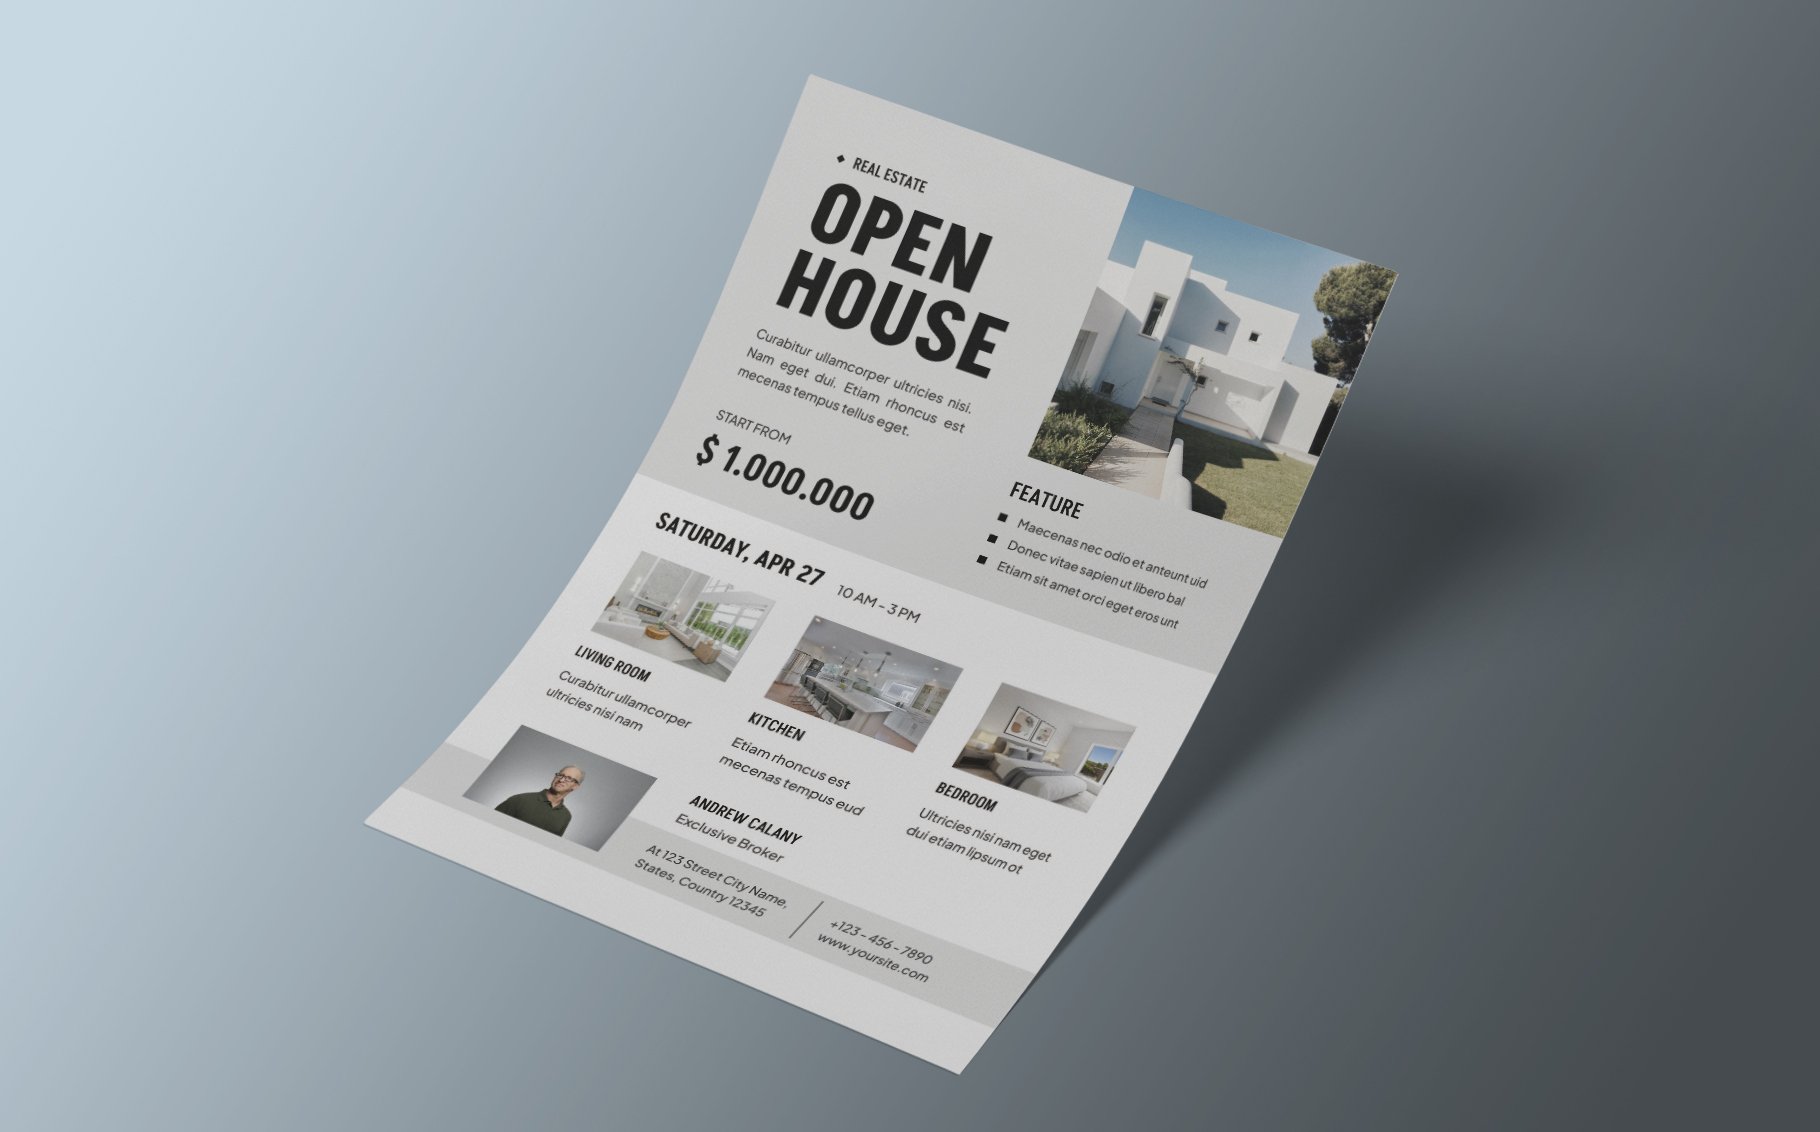 Real Estate Open House Flyer preview image.